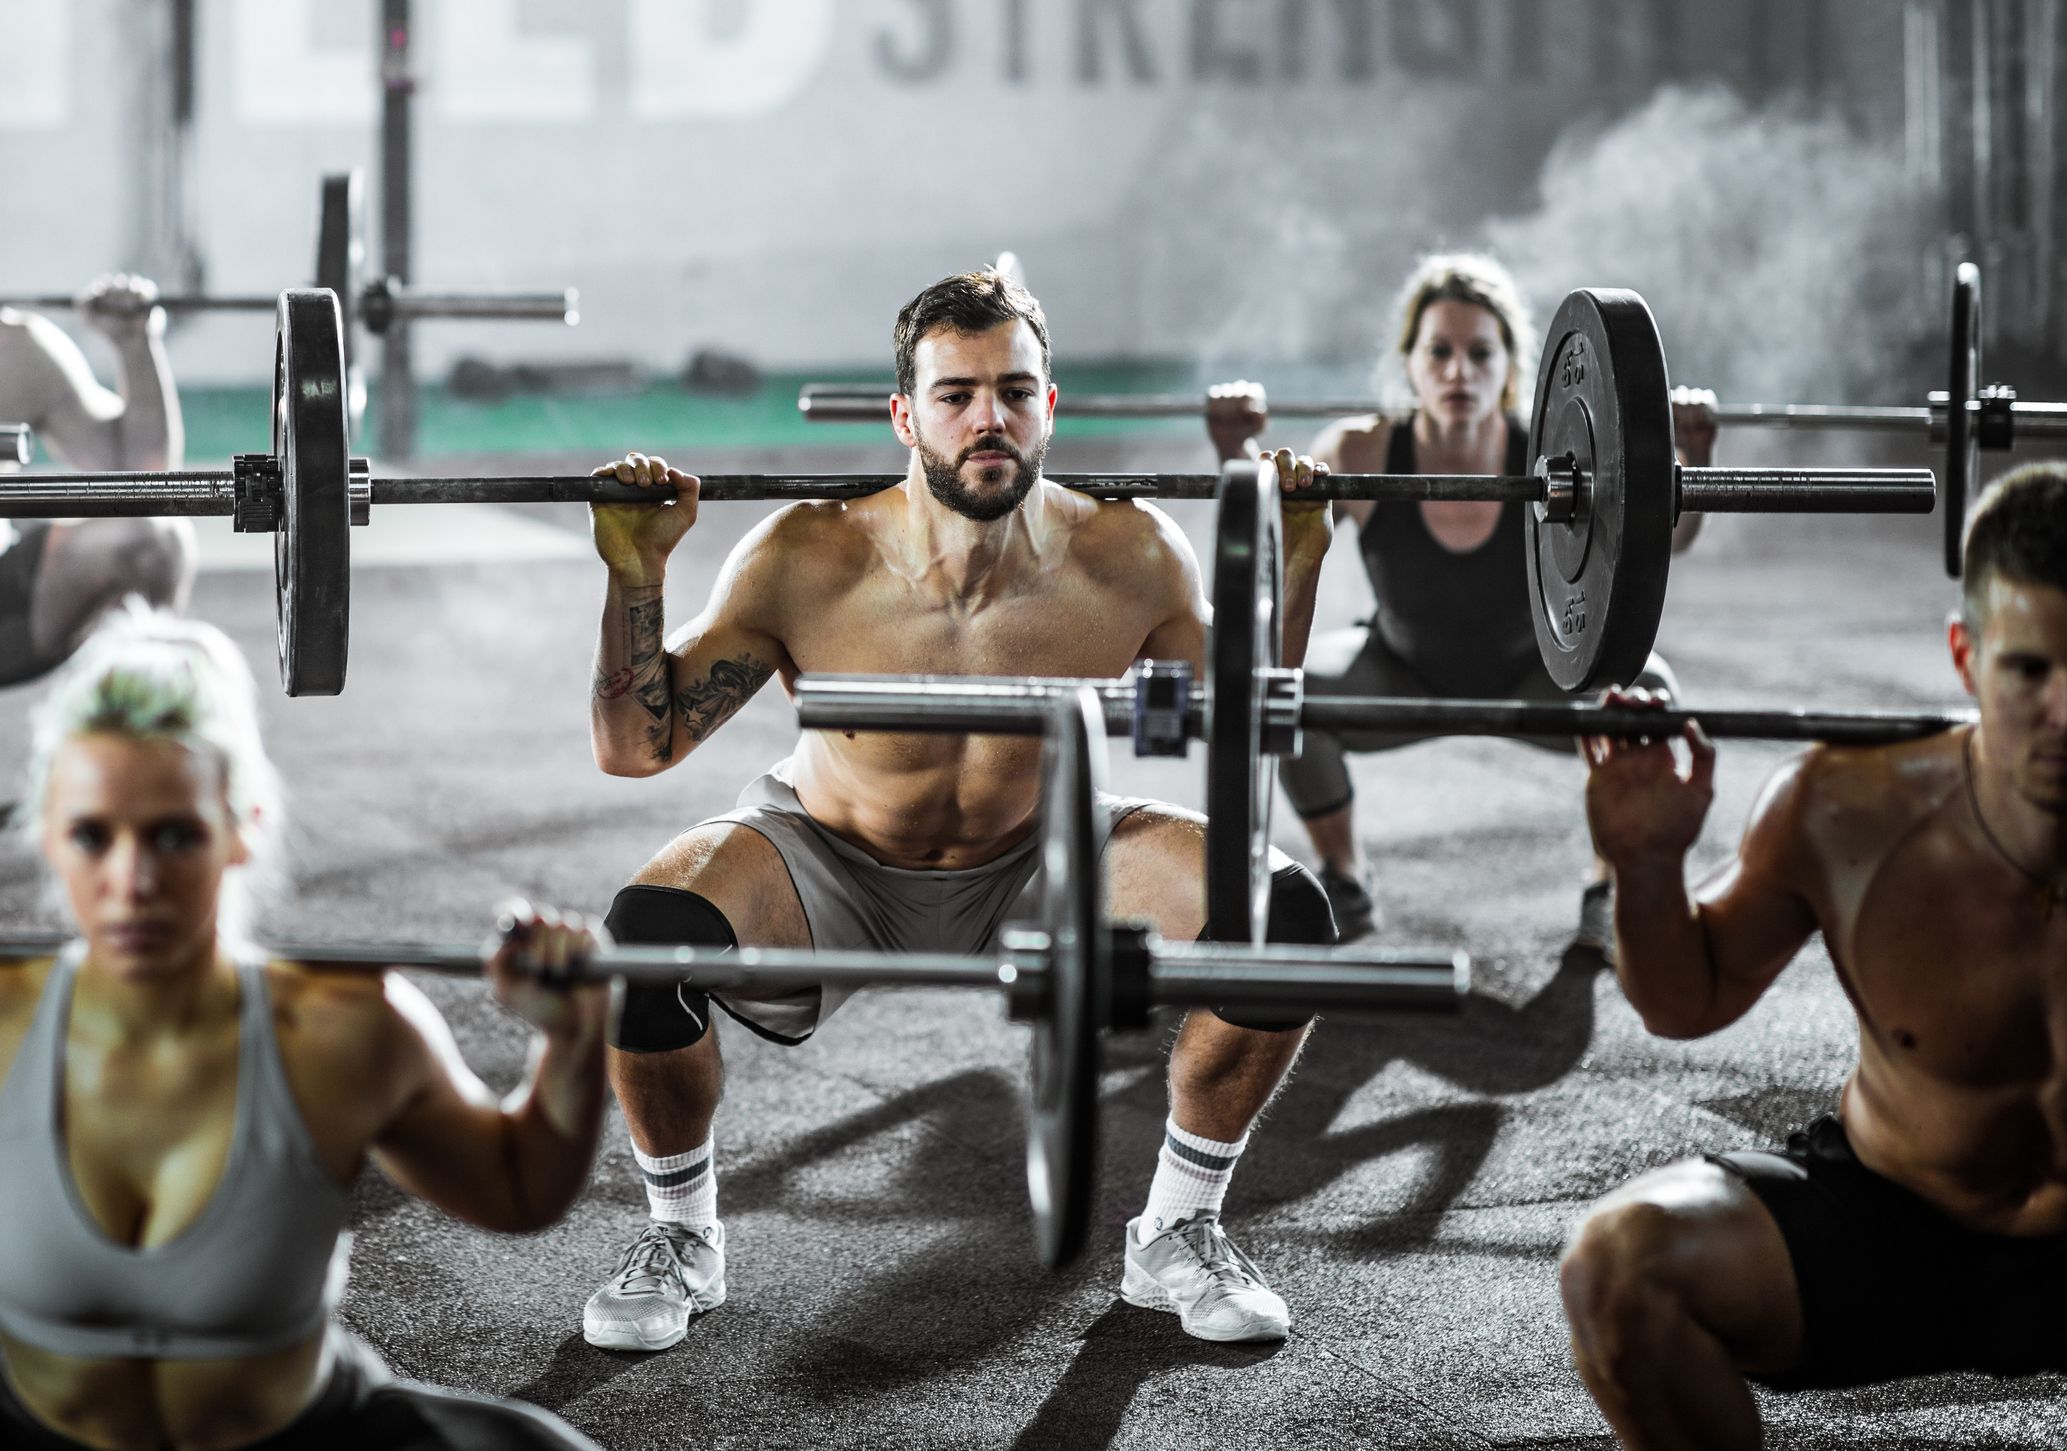 Online dating for Crossfit